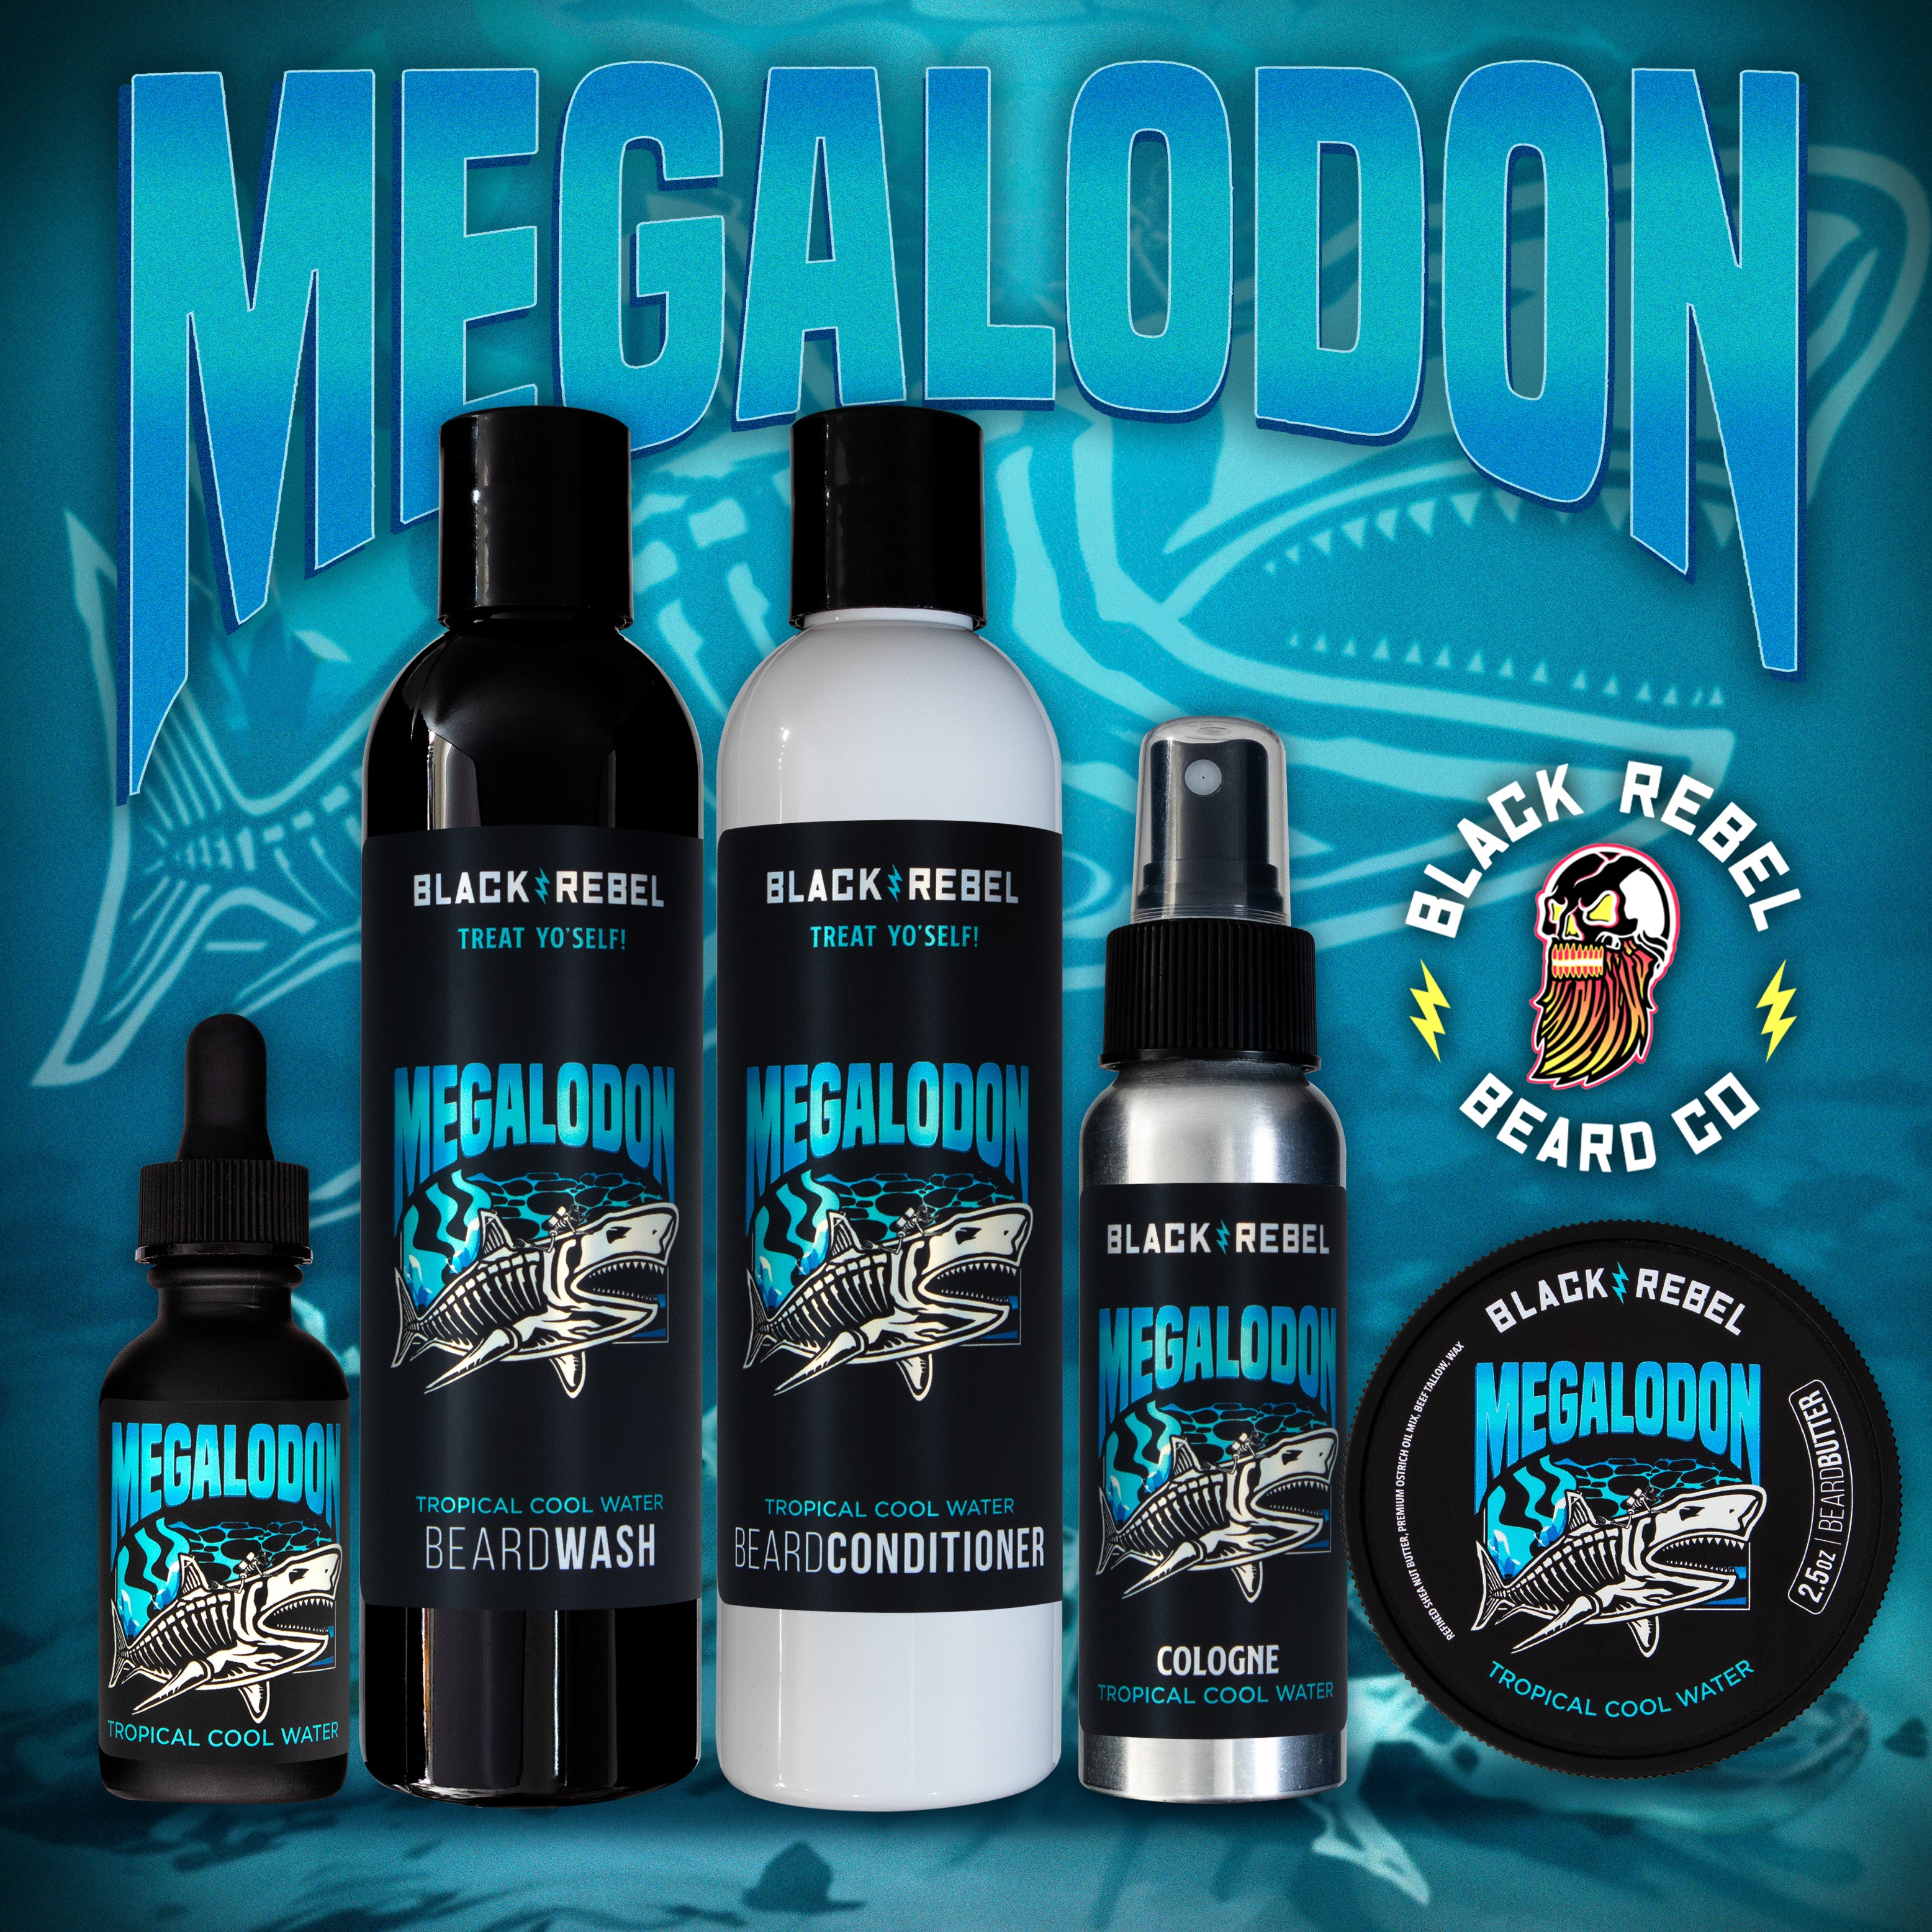 THE MEGALODON (tropical cool water)